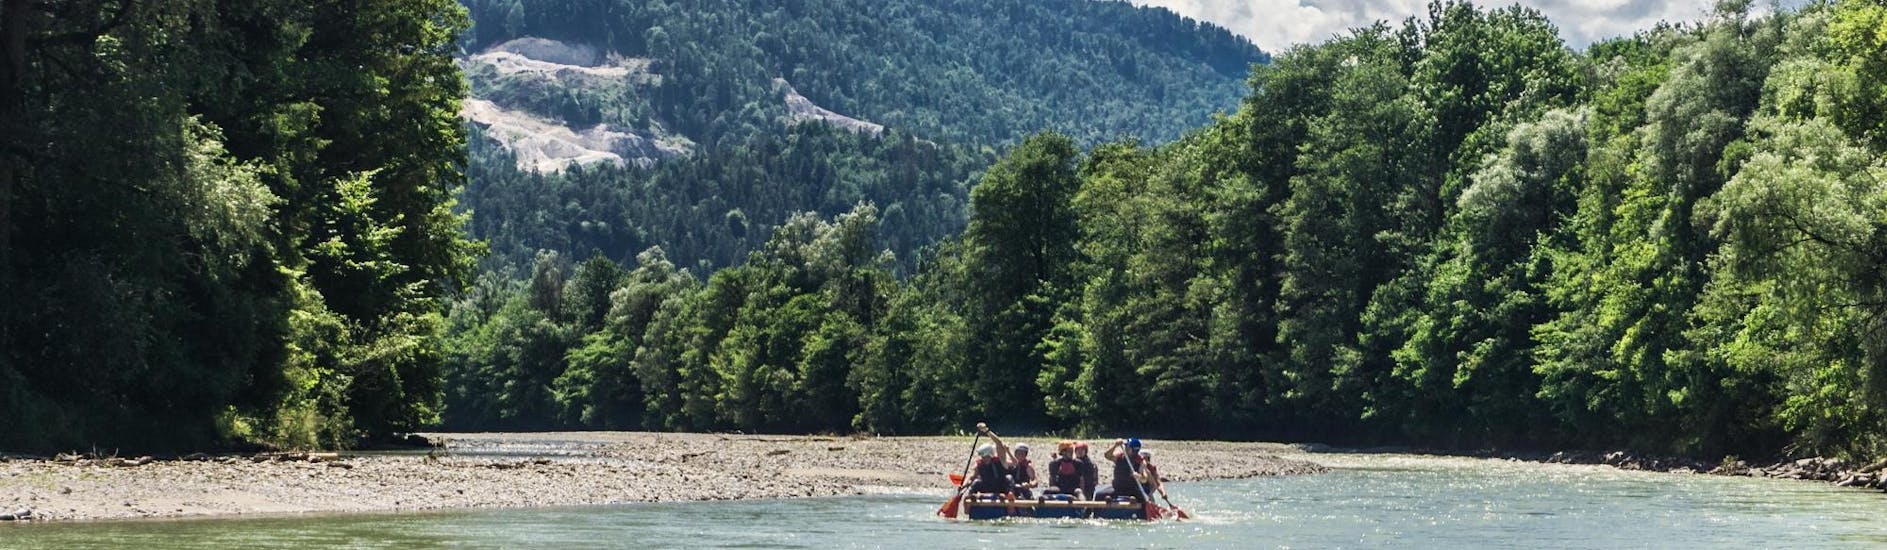 group rafting during a bachelor event hosted by Outdoor Center Baumgarten.